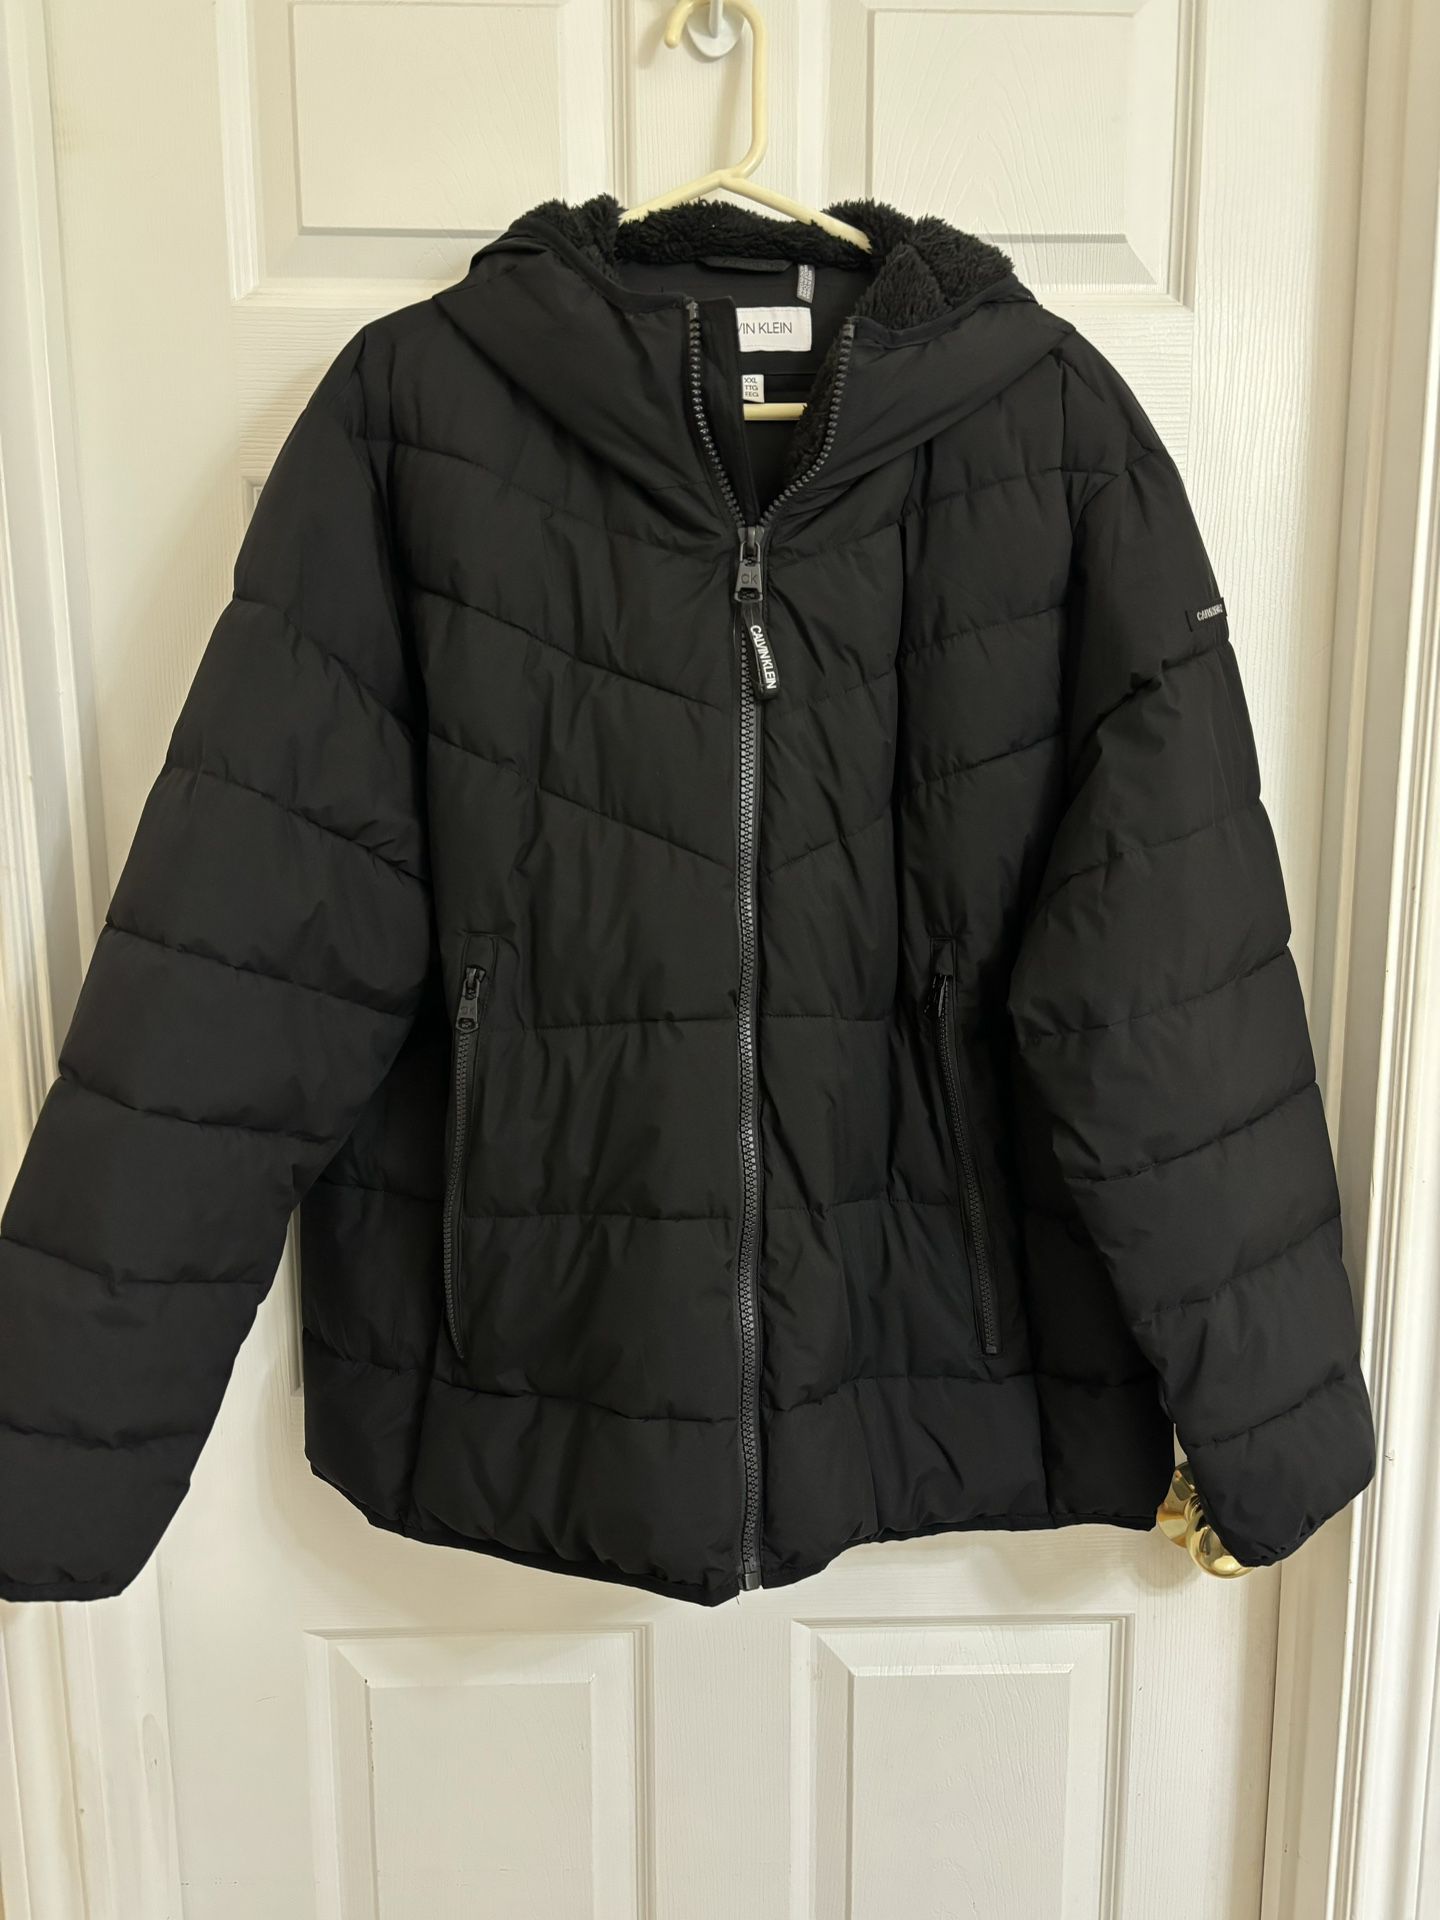 Women’s XXL  Calvin Klein Puffer Jacket - NEW without tag